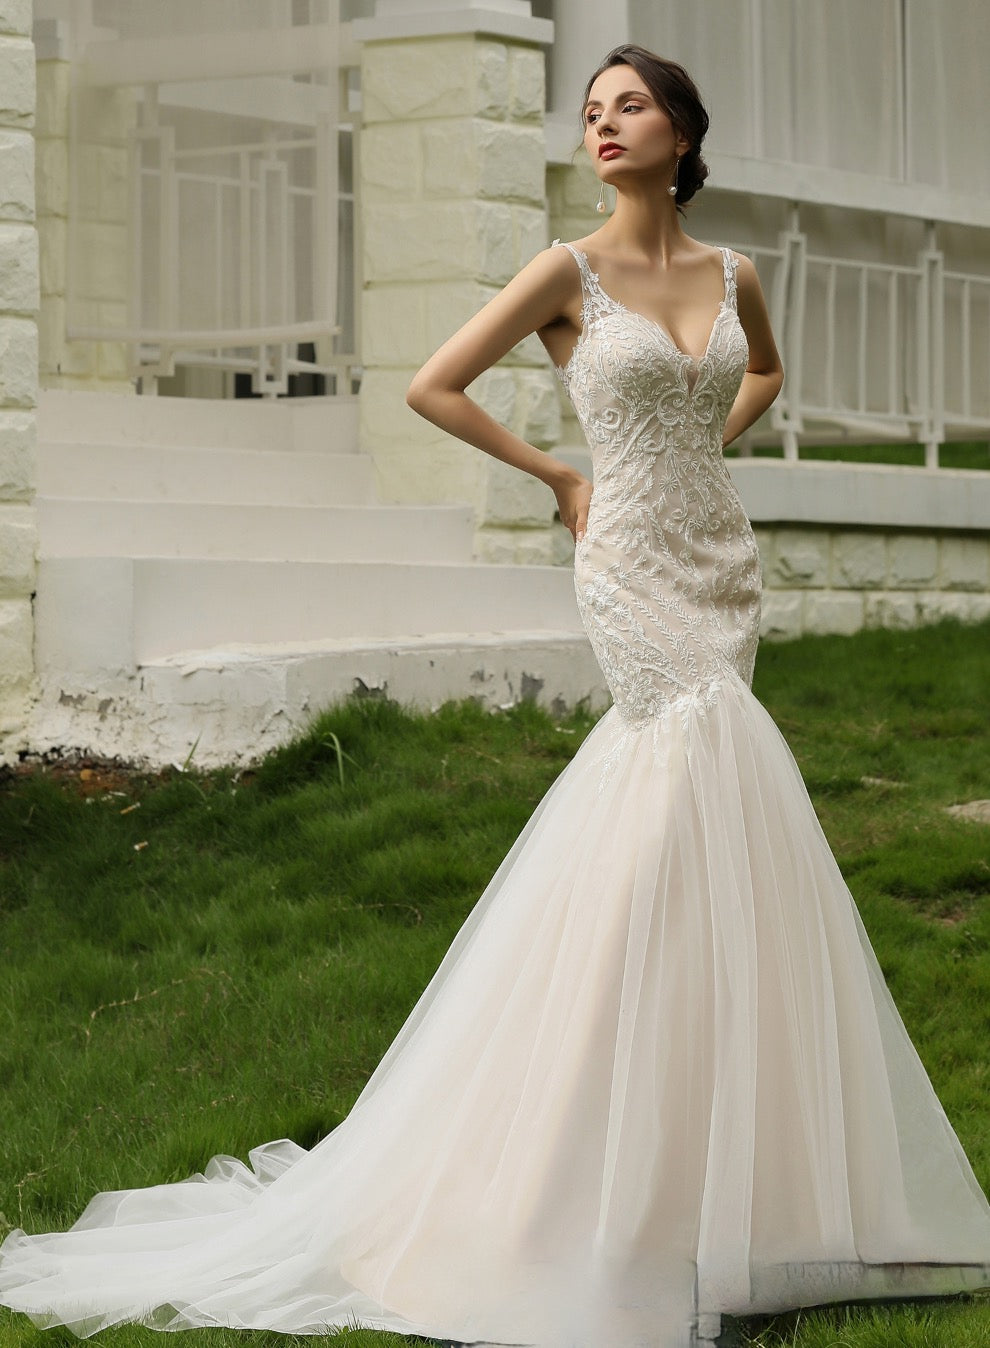 Custom Ivory Mermaid Black Bridal Gowns With Trumpet, Zipper Lace